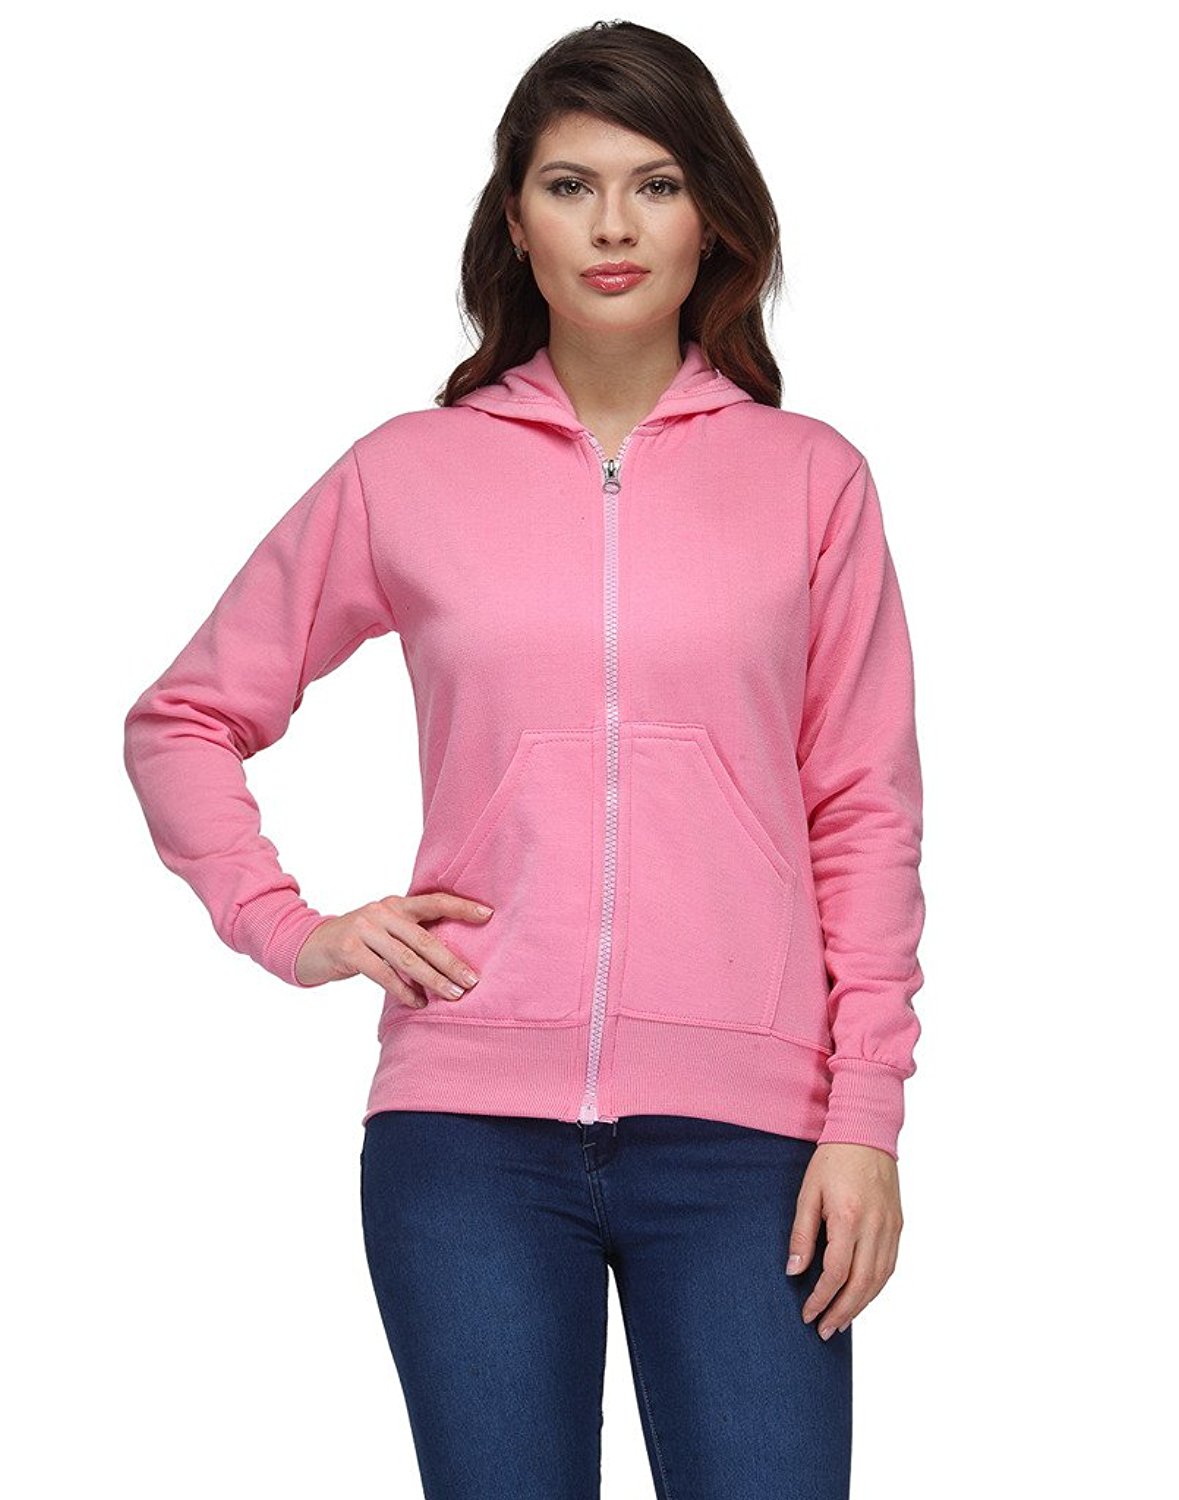 Buy Christy Collection Solid Womens Sweatshirt Online @ ₹509 from ShopClues